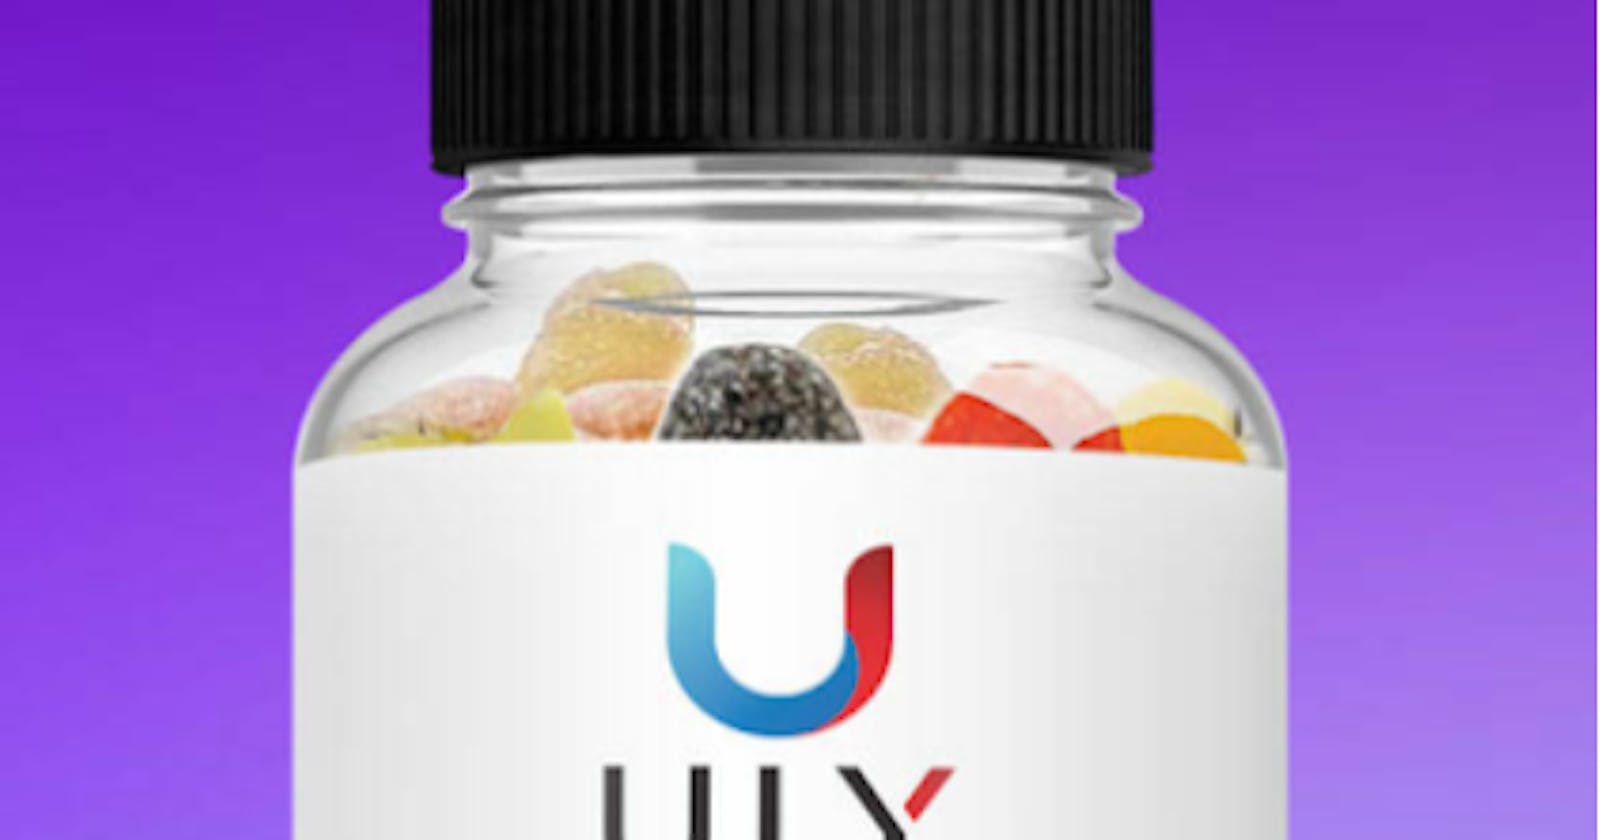 Uly Keto CBD Gummies: Reviews Safe Money Weight Loss Reviews, Price, Official Store